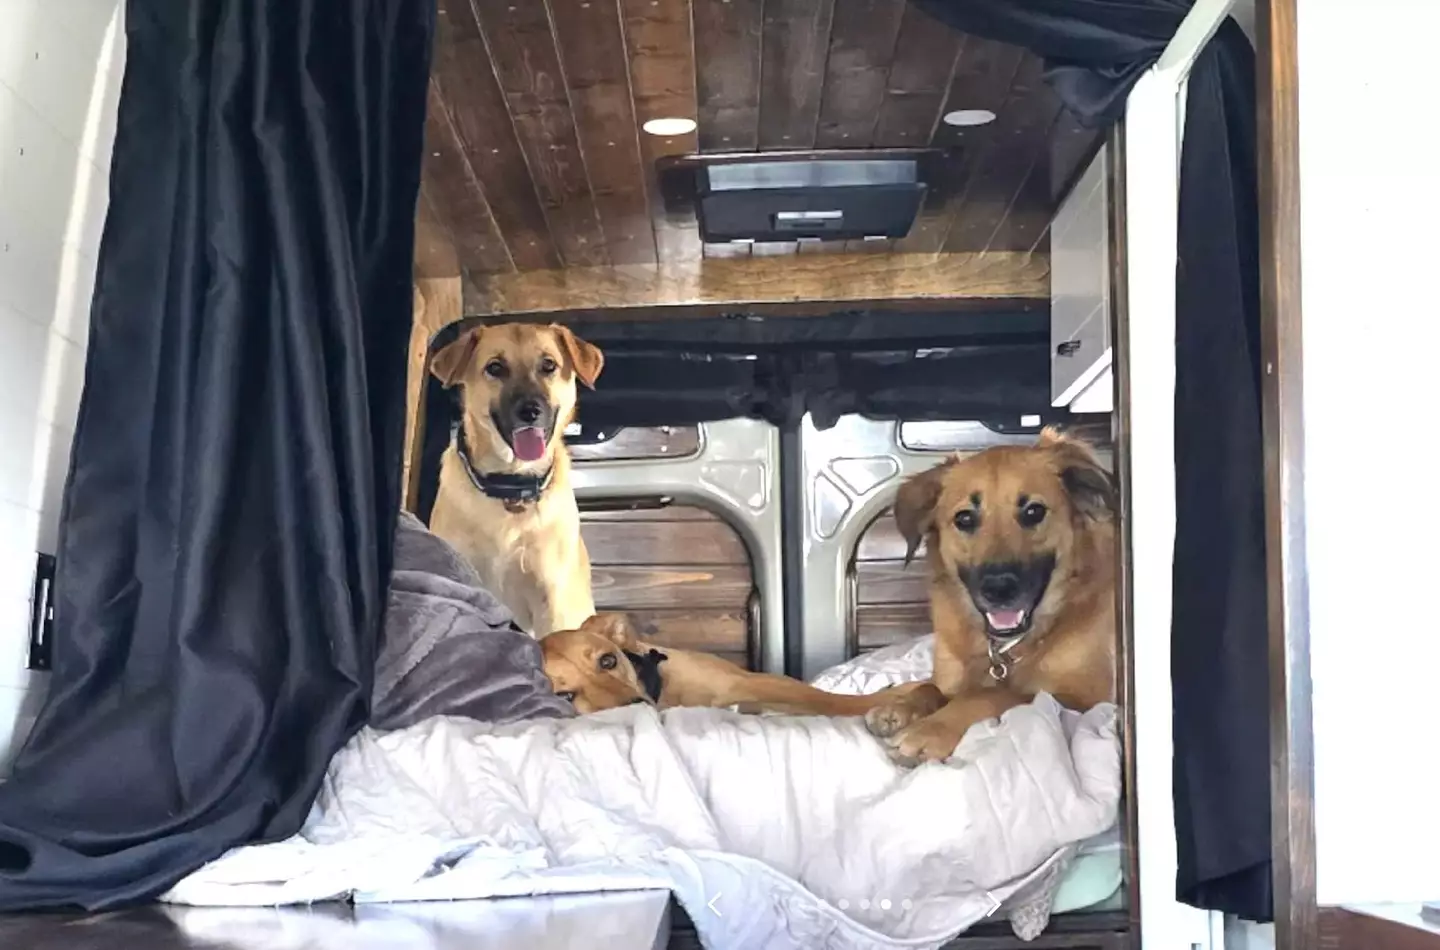 They chose to have three wishes granted, which included getting a Sprinter van to fit their four beloved dogs (Treasure Game$)